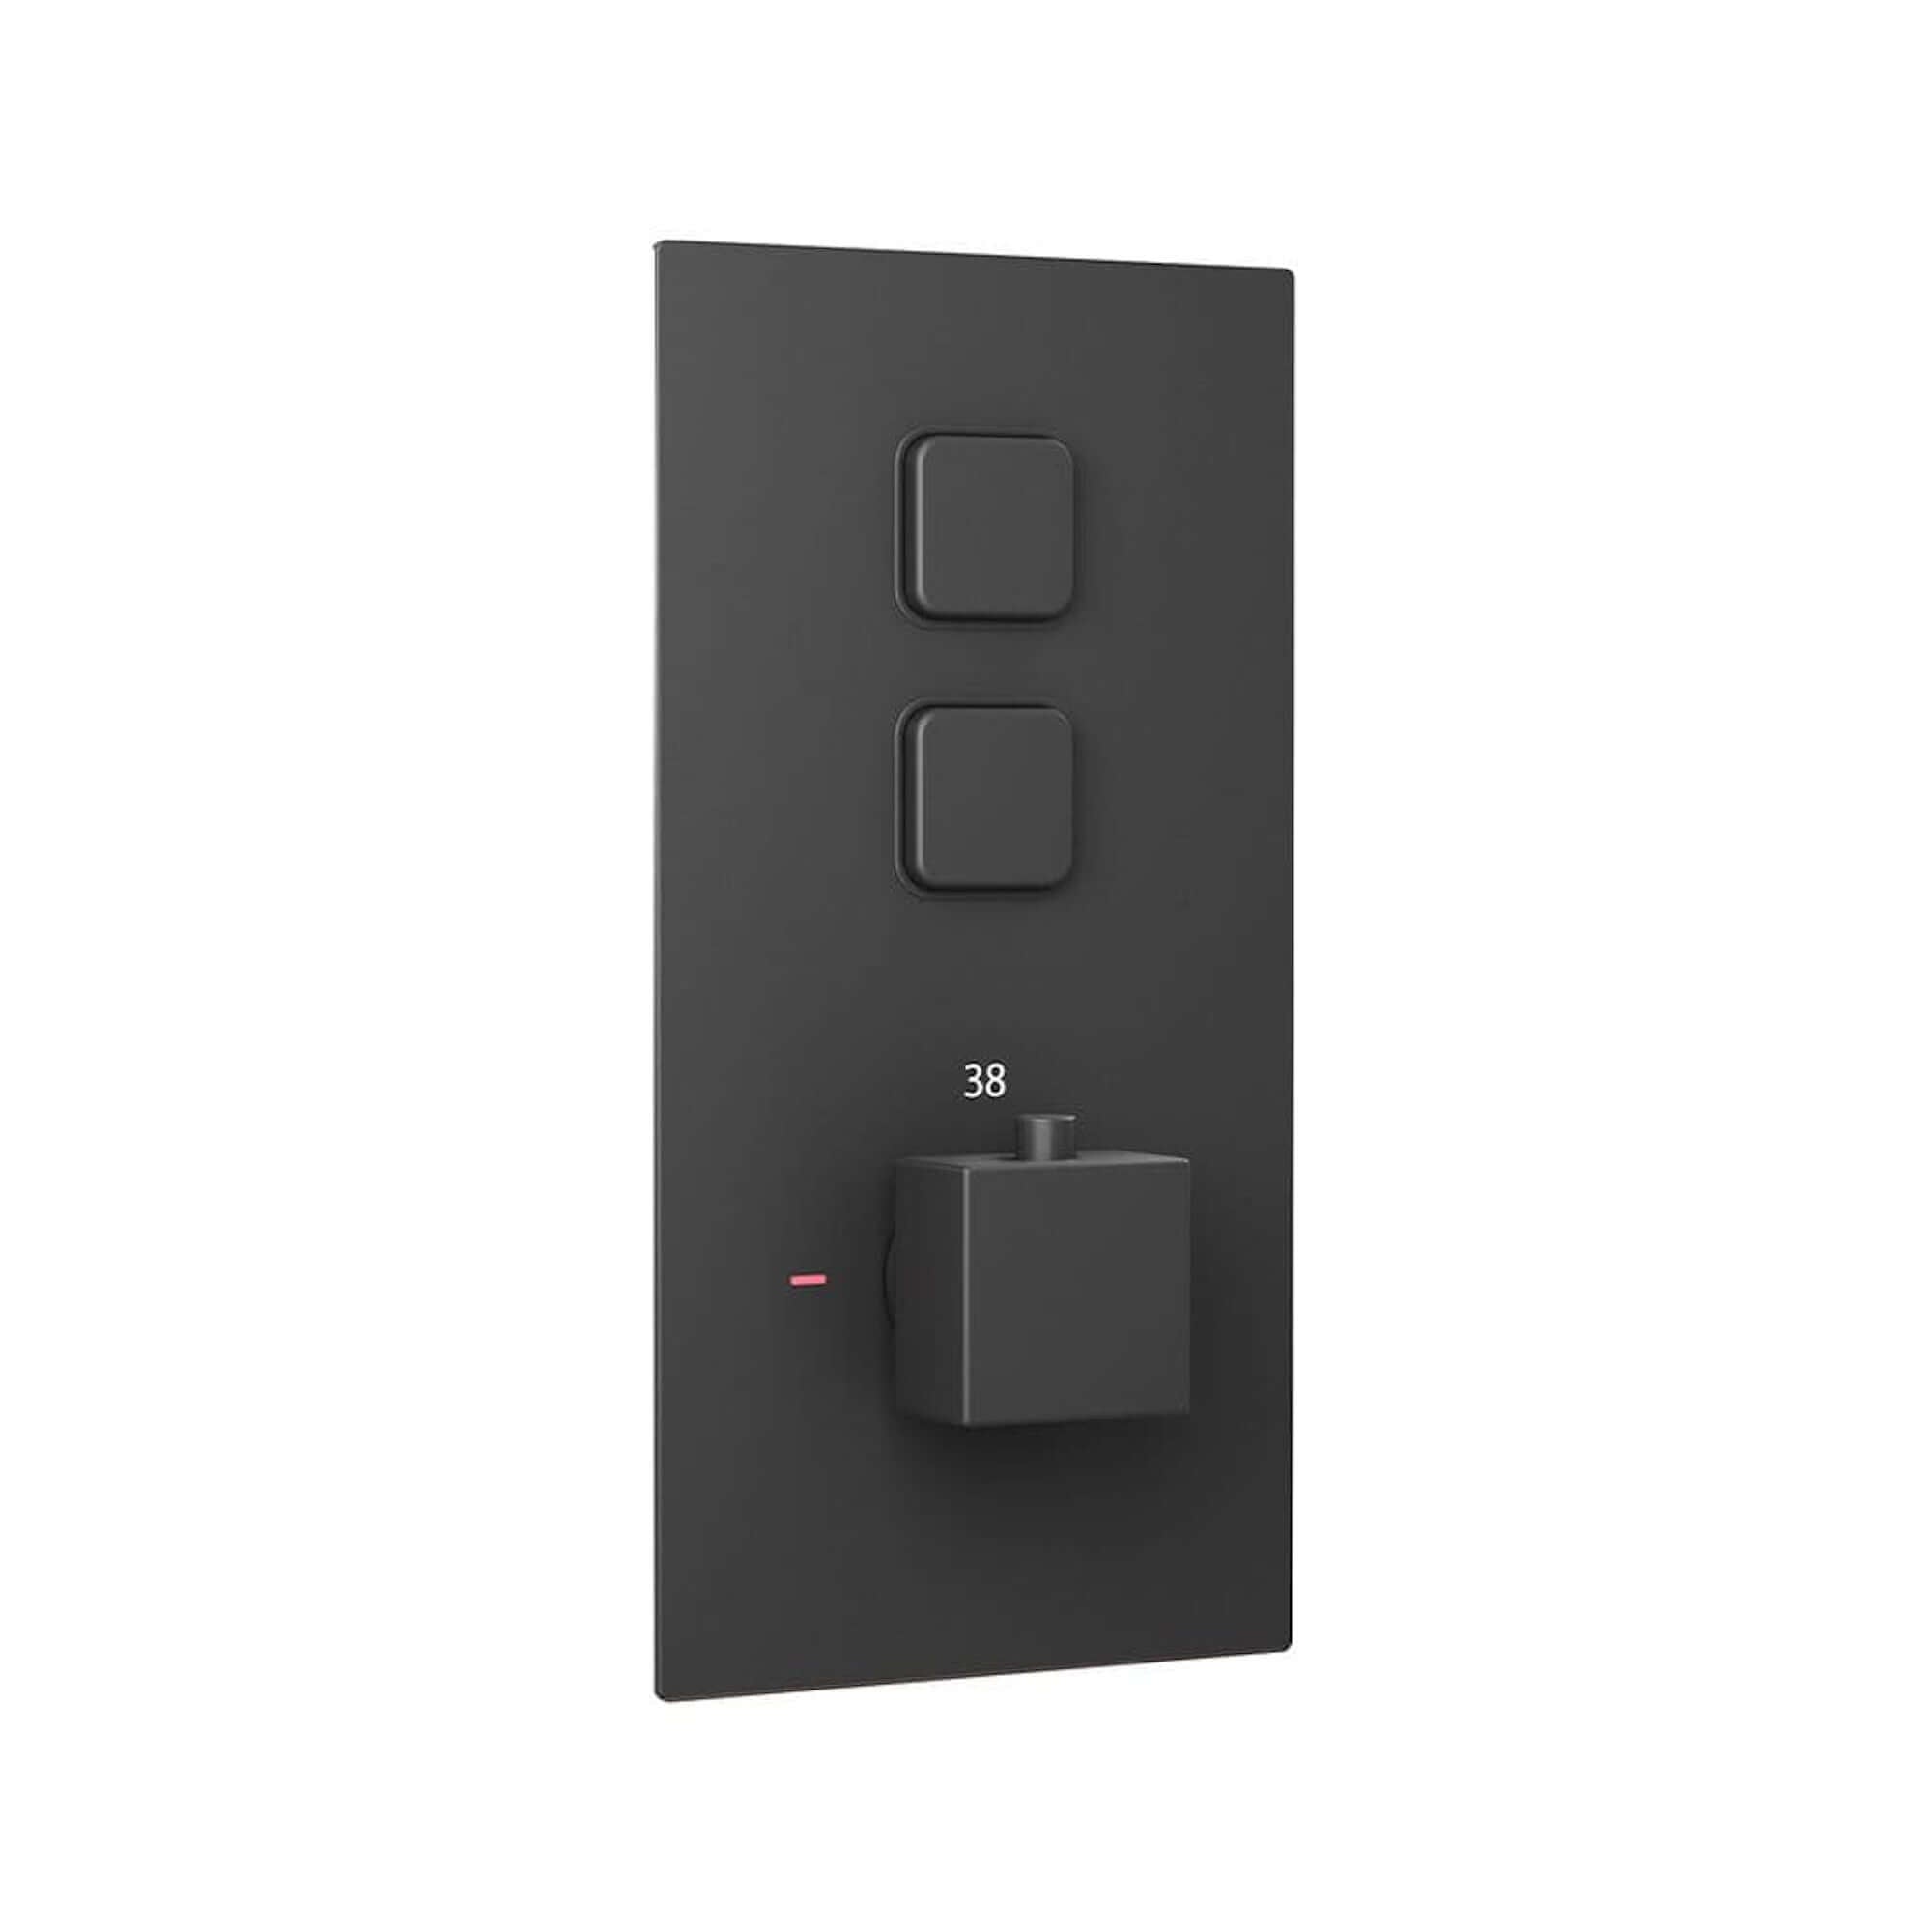 Milan square push button concealed thermostatic shower valve with 2 outlets - black - Showers